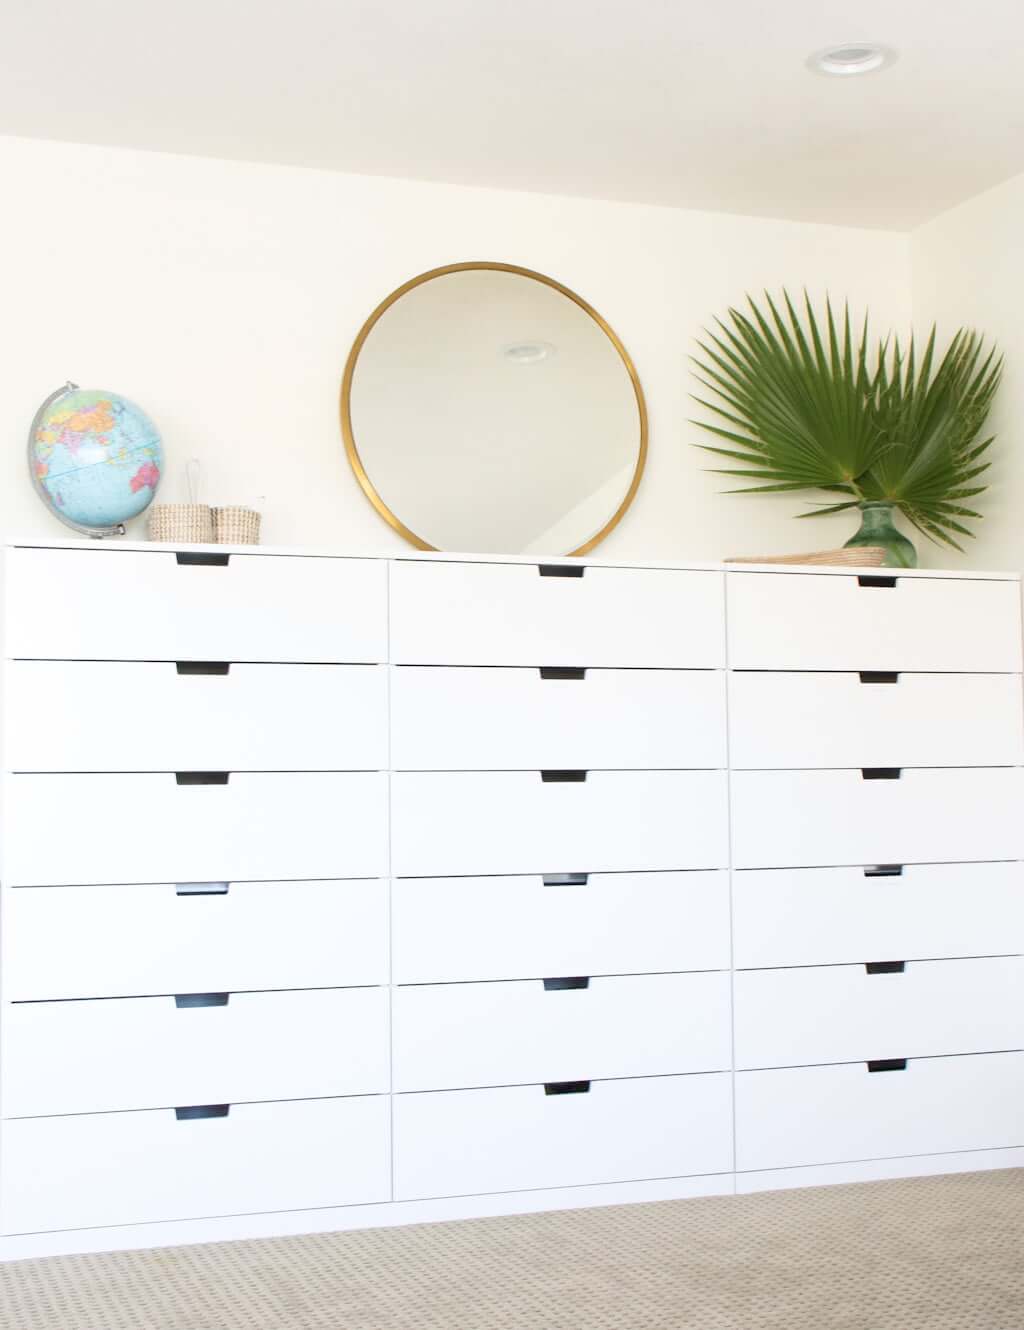 IKEA homeschool drawer storage on wall with mirror, globe, and fan palm in vase